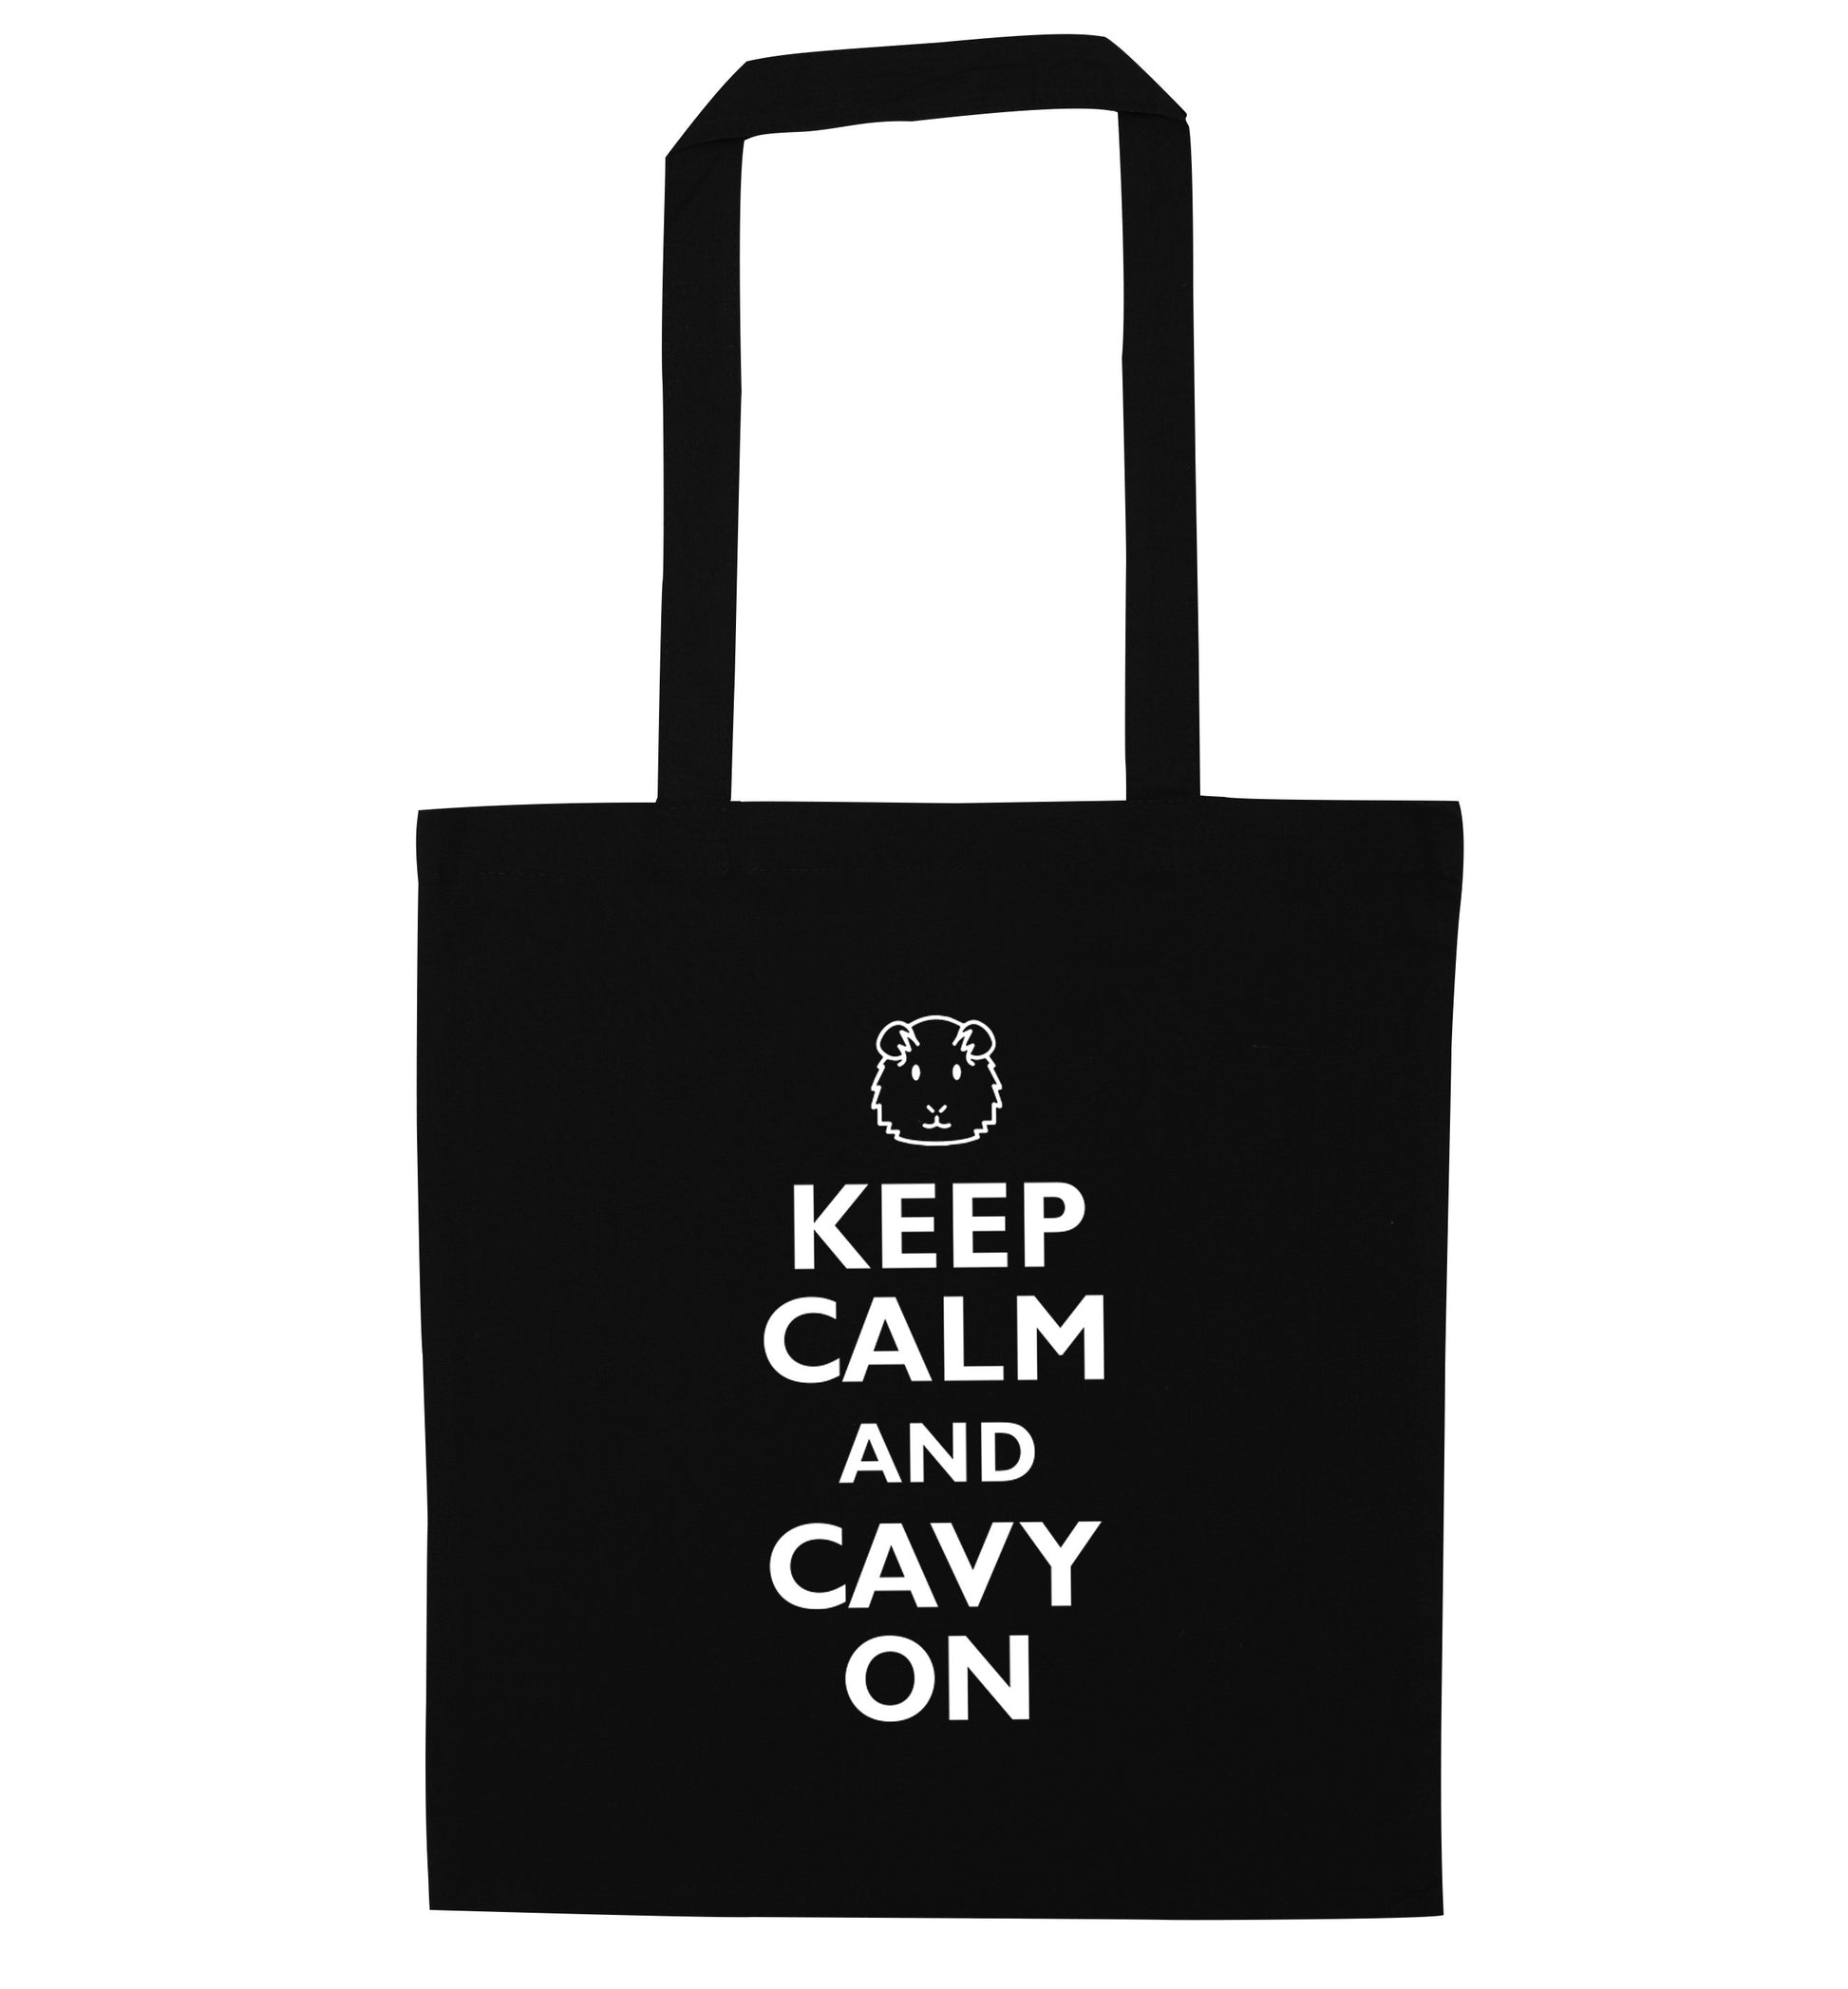 Keep calm and cavvy on black tote bag